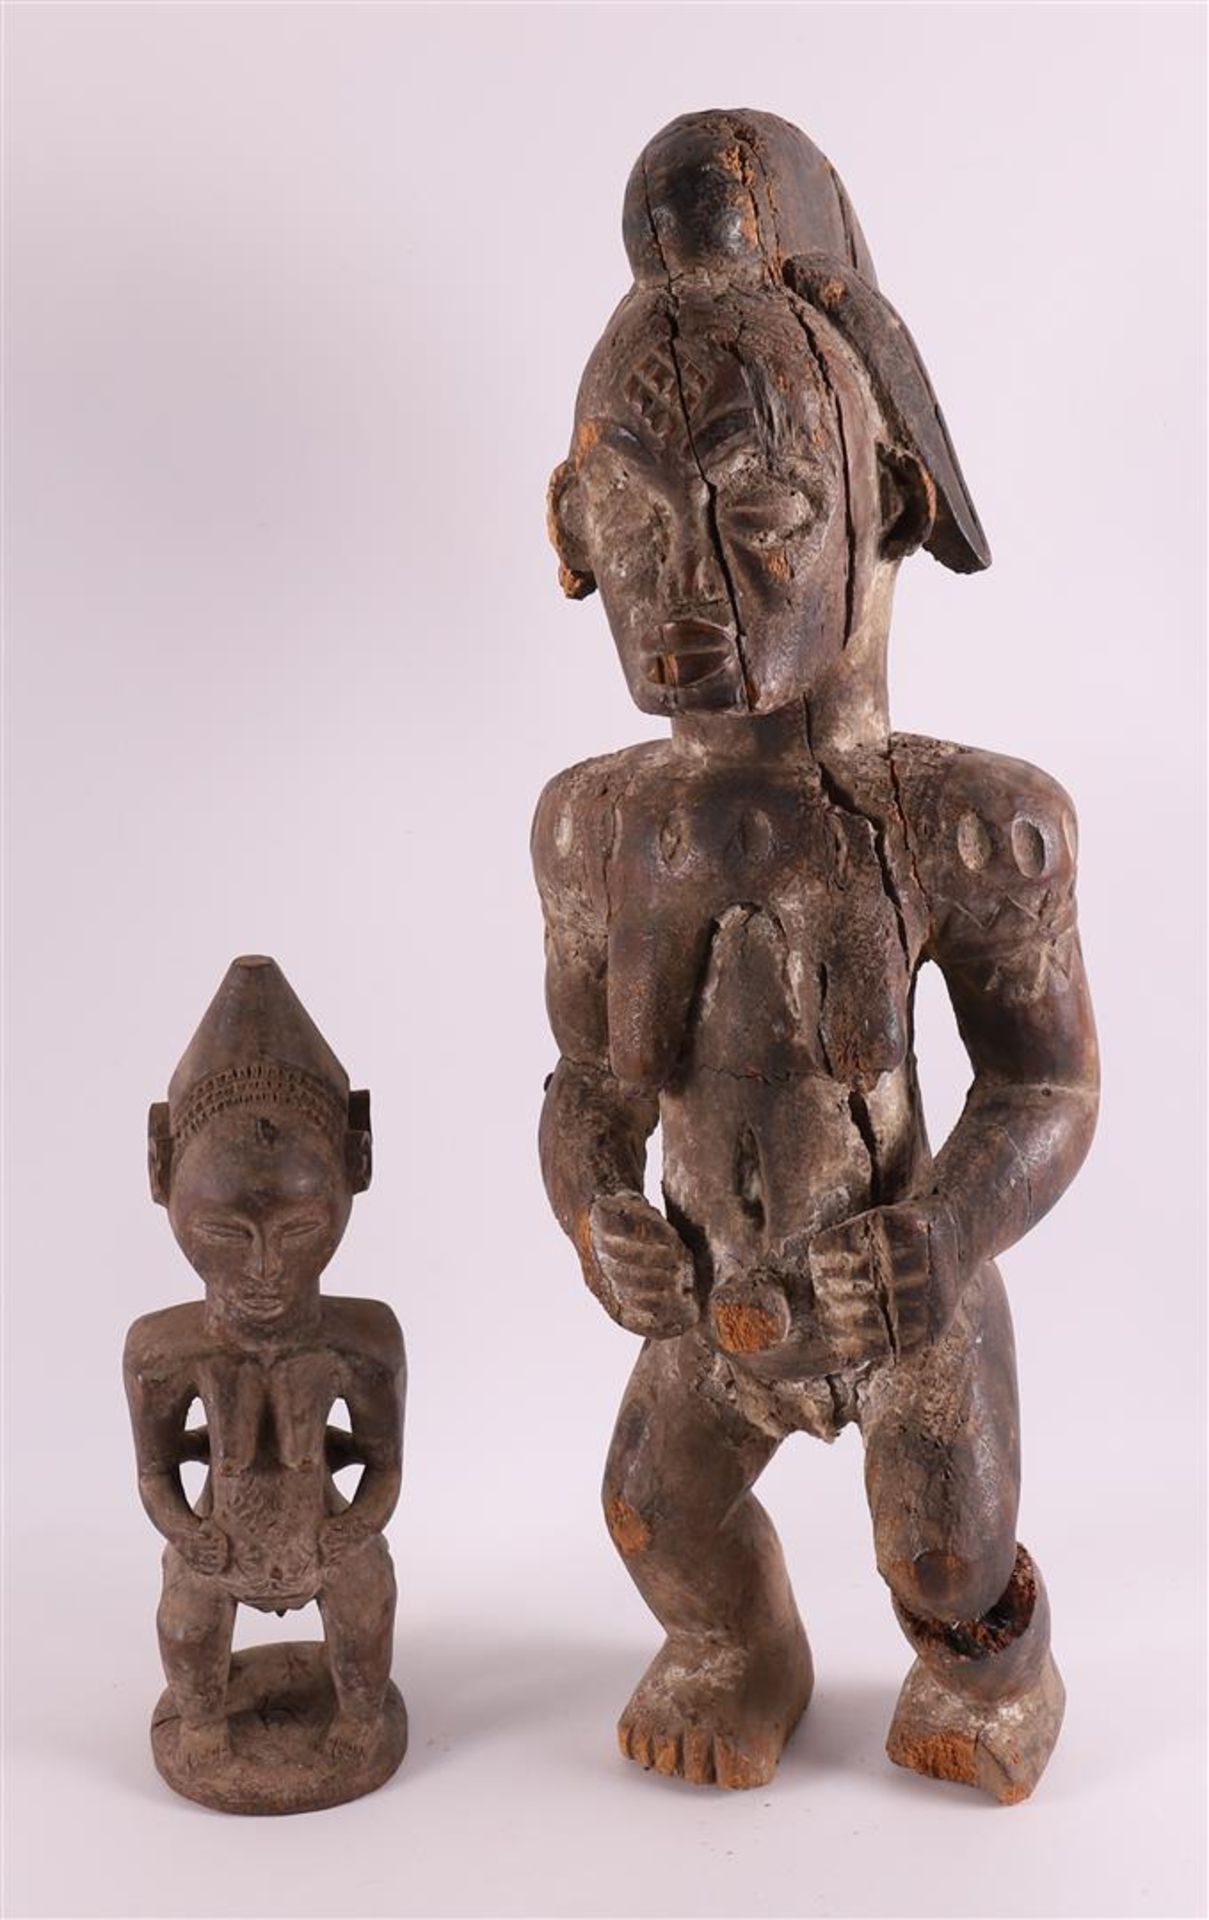 A carved sculpture, Fang, Gabon, Africa, 20th century